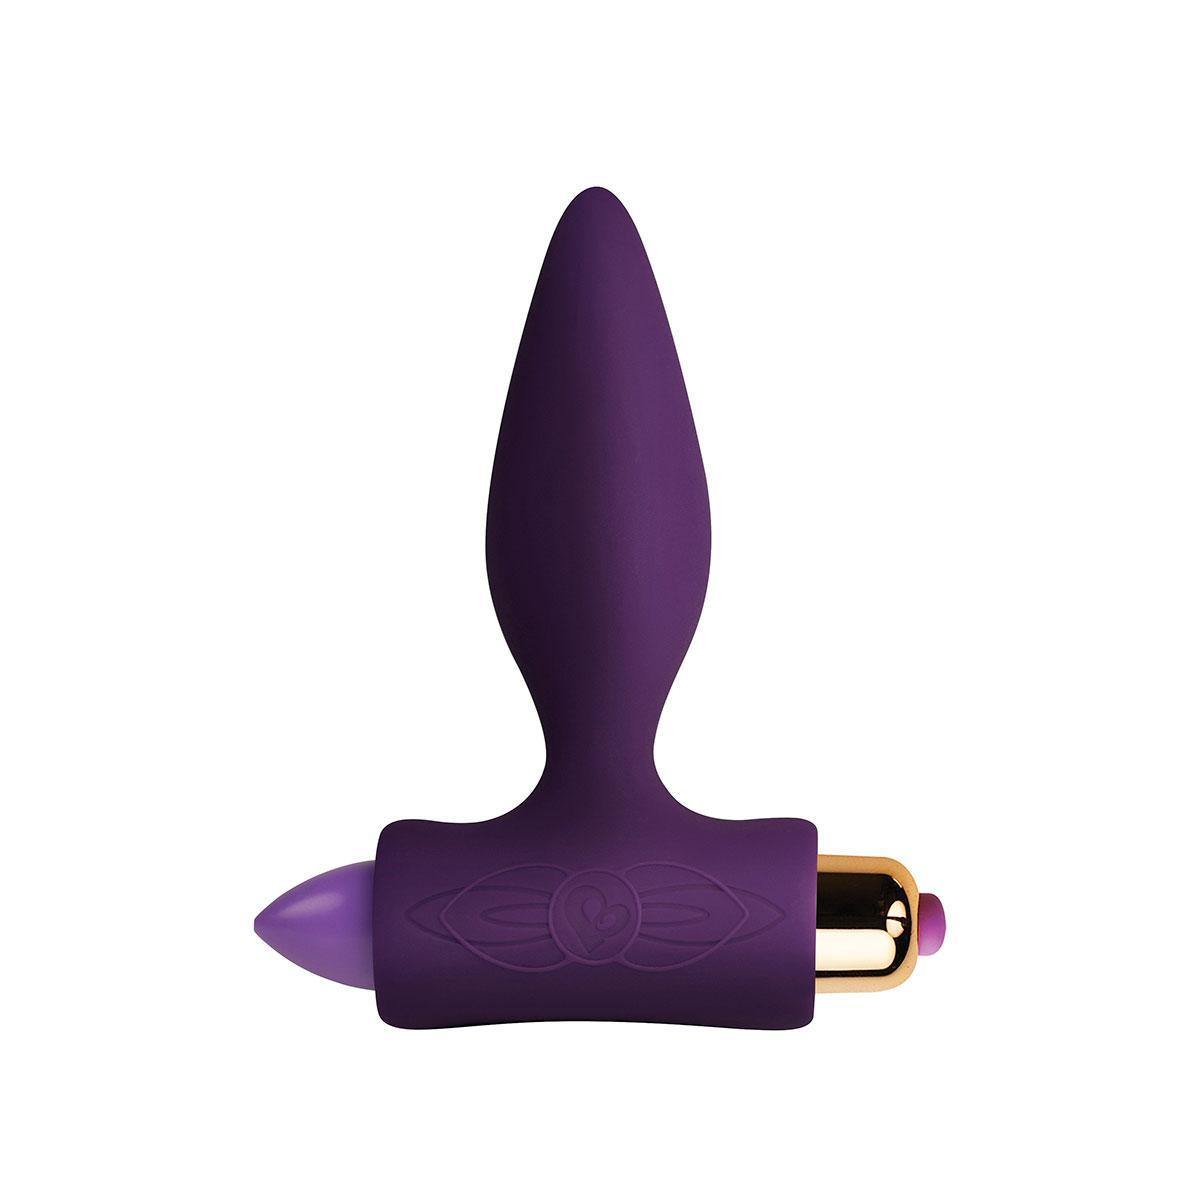 Petite Sensations Smooth Plug - Purple - Buy At Luxury Toy X - Free 3-Day Shipping